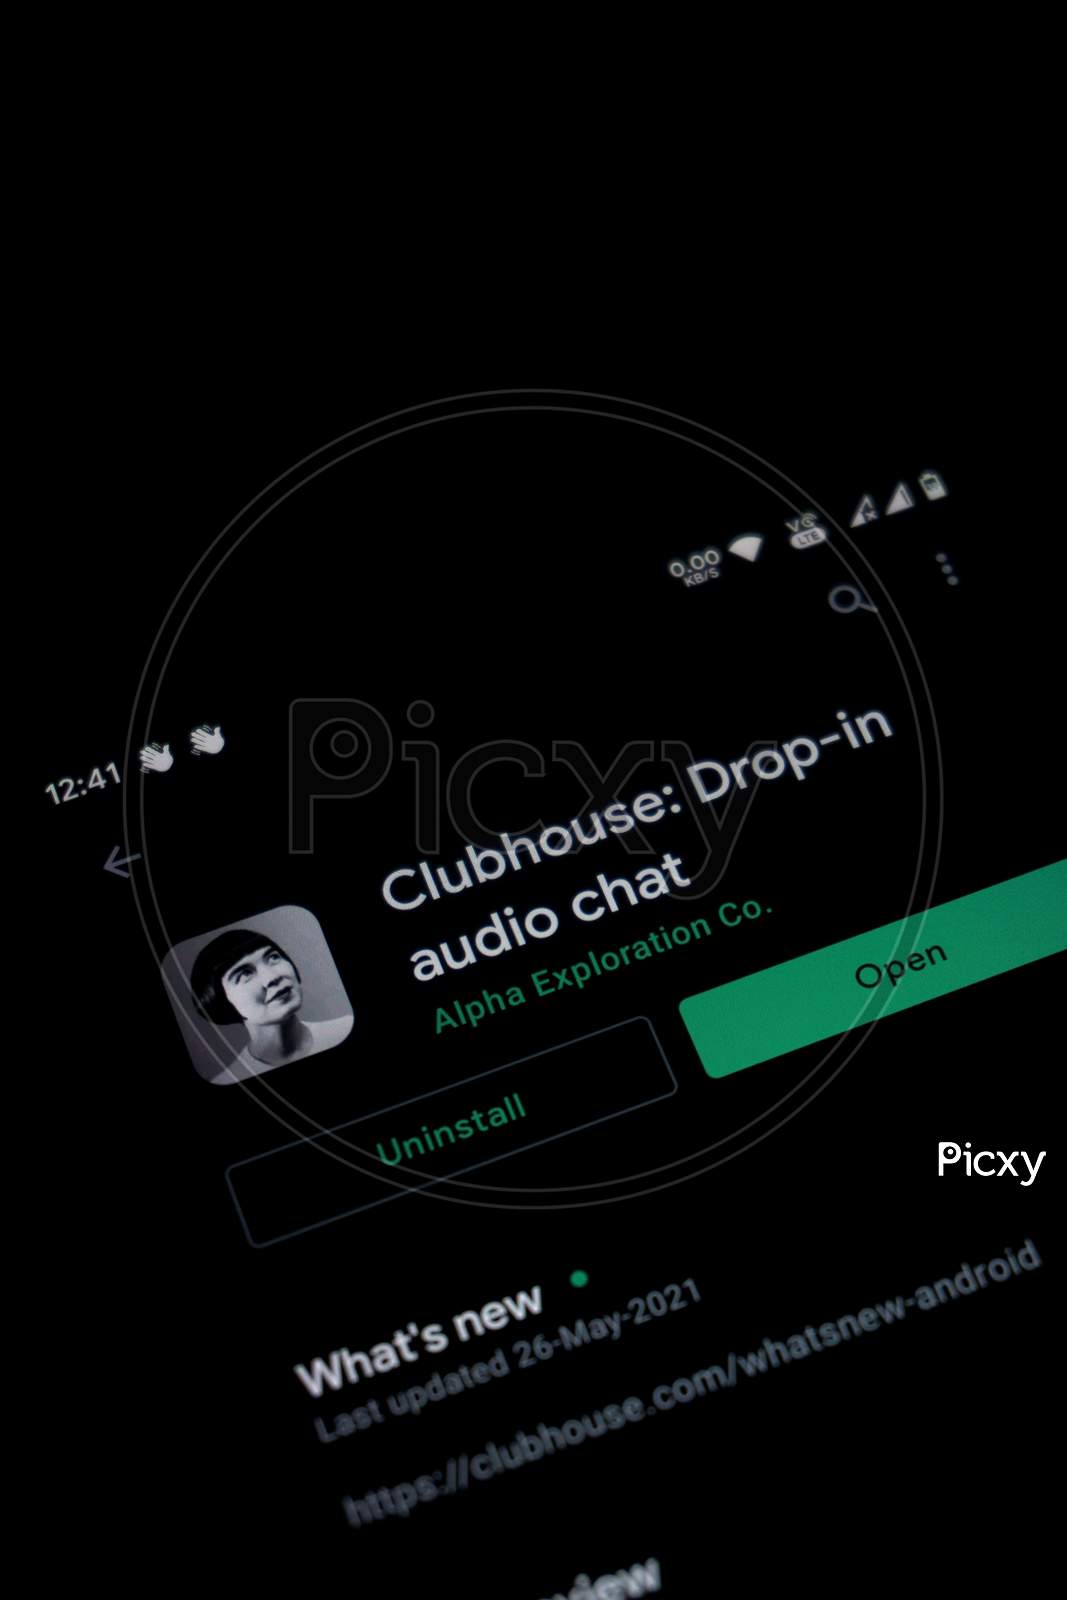 Kerala, India - June 02, 2021: Drop-In Audio Chat App Clubhouse Is Appearing In Google Play Store On A Smartphone.